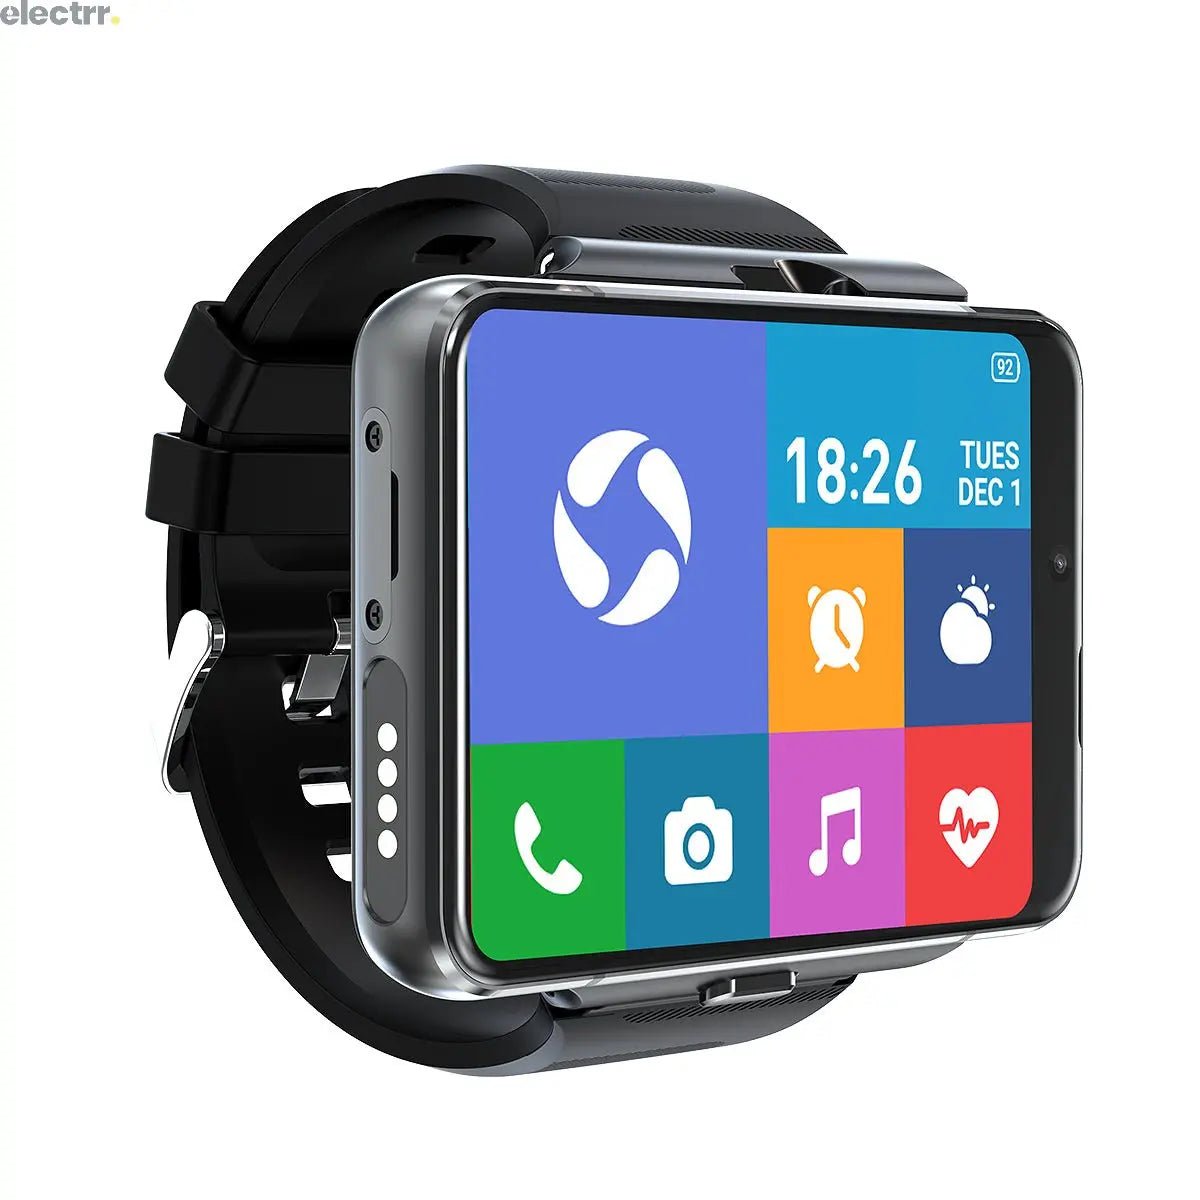 2.88 inch 4G Android smartwatch removable IP65 waterproof 4G smart watch with camera support SIM card | Electrr Inc